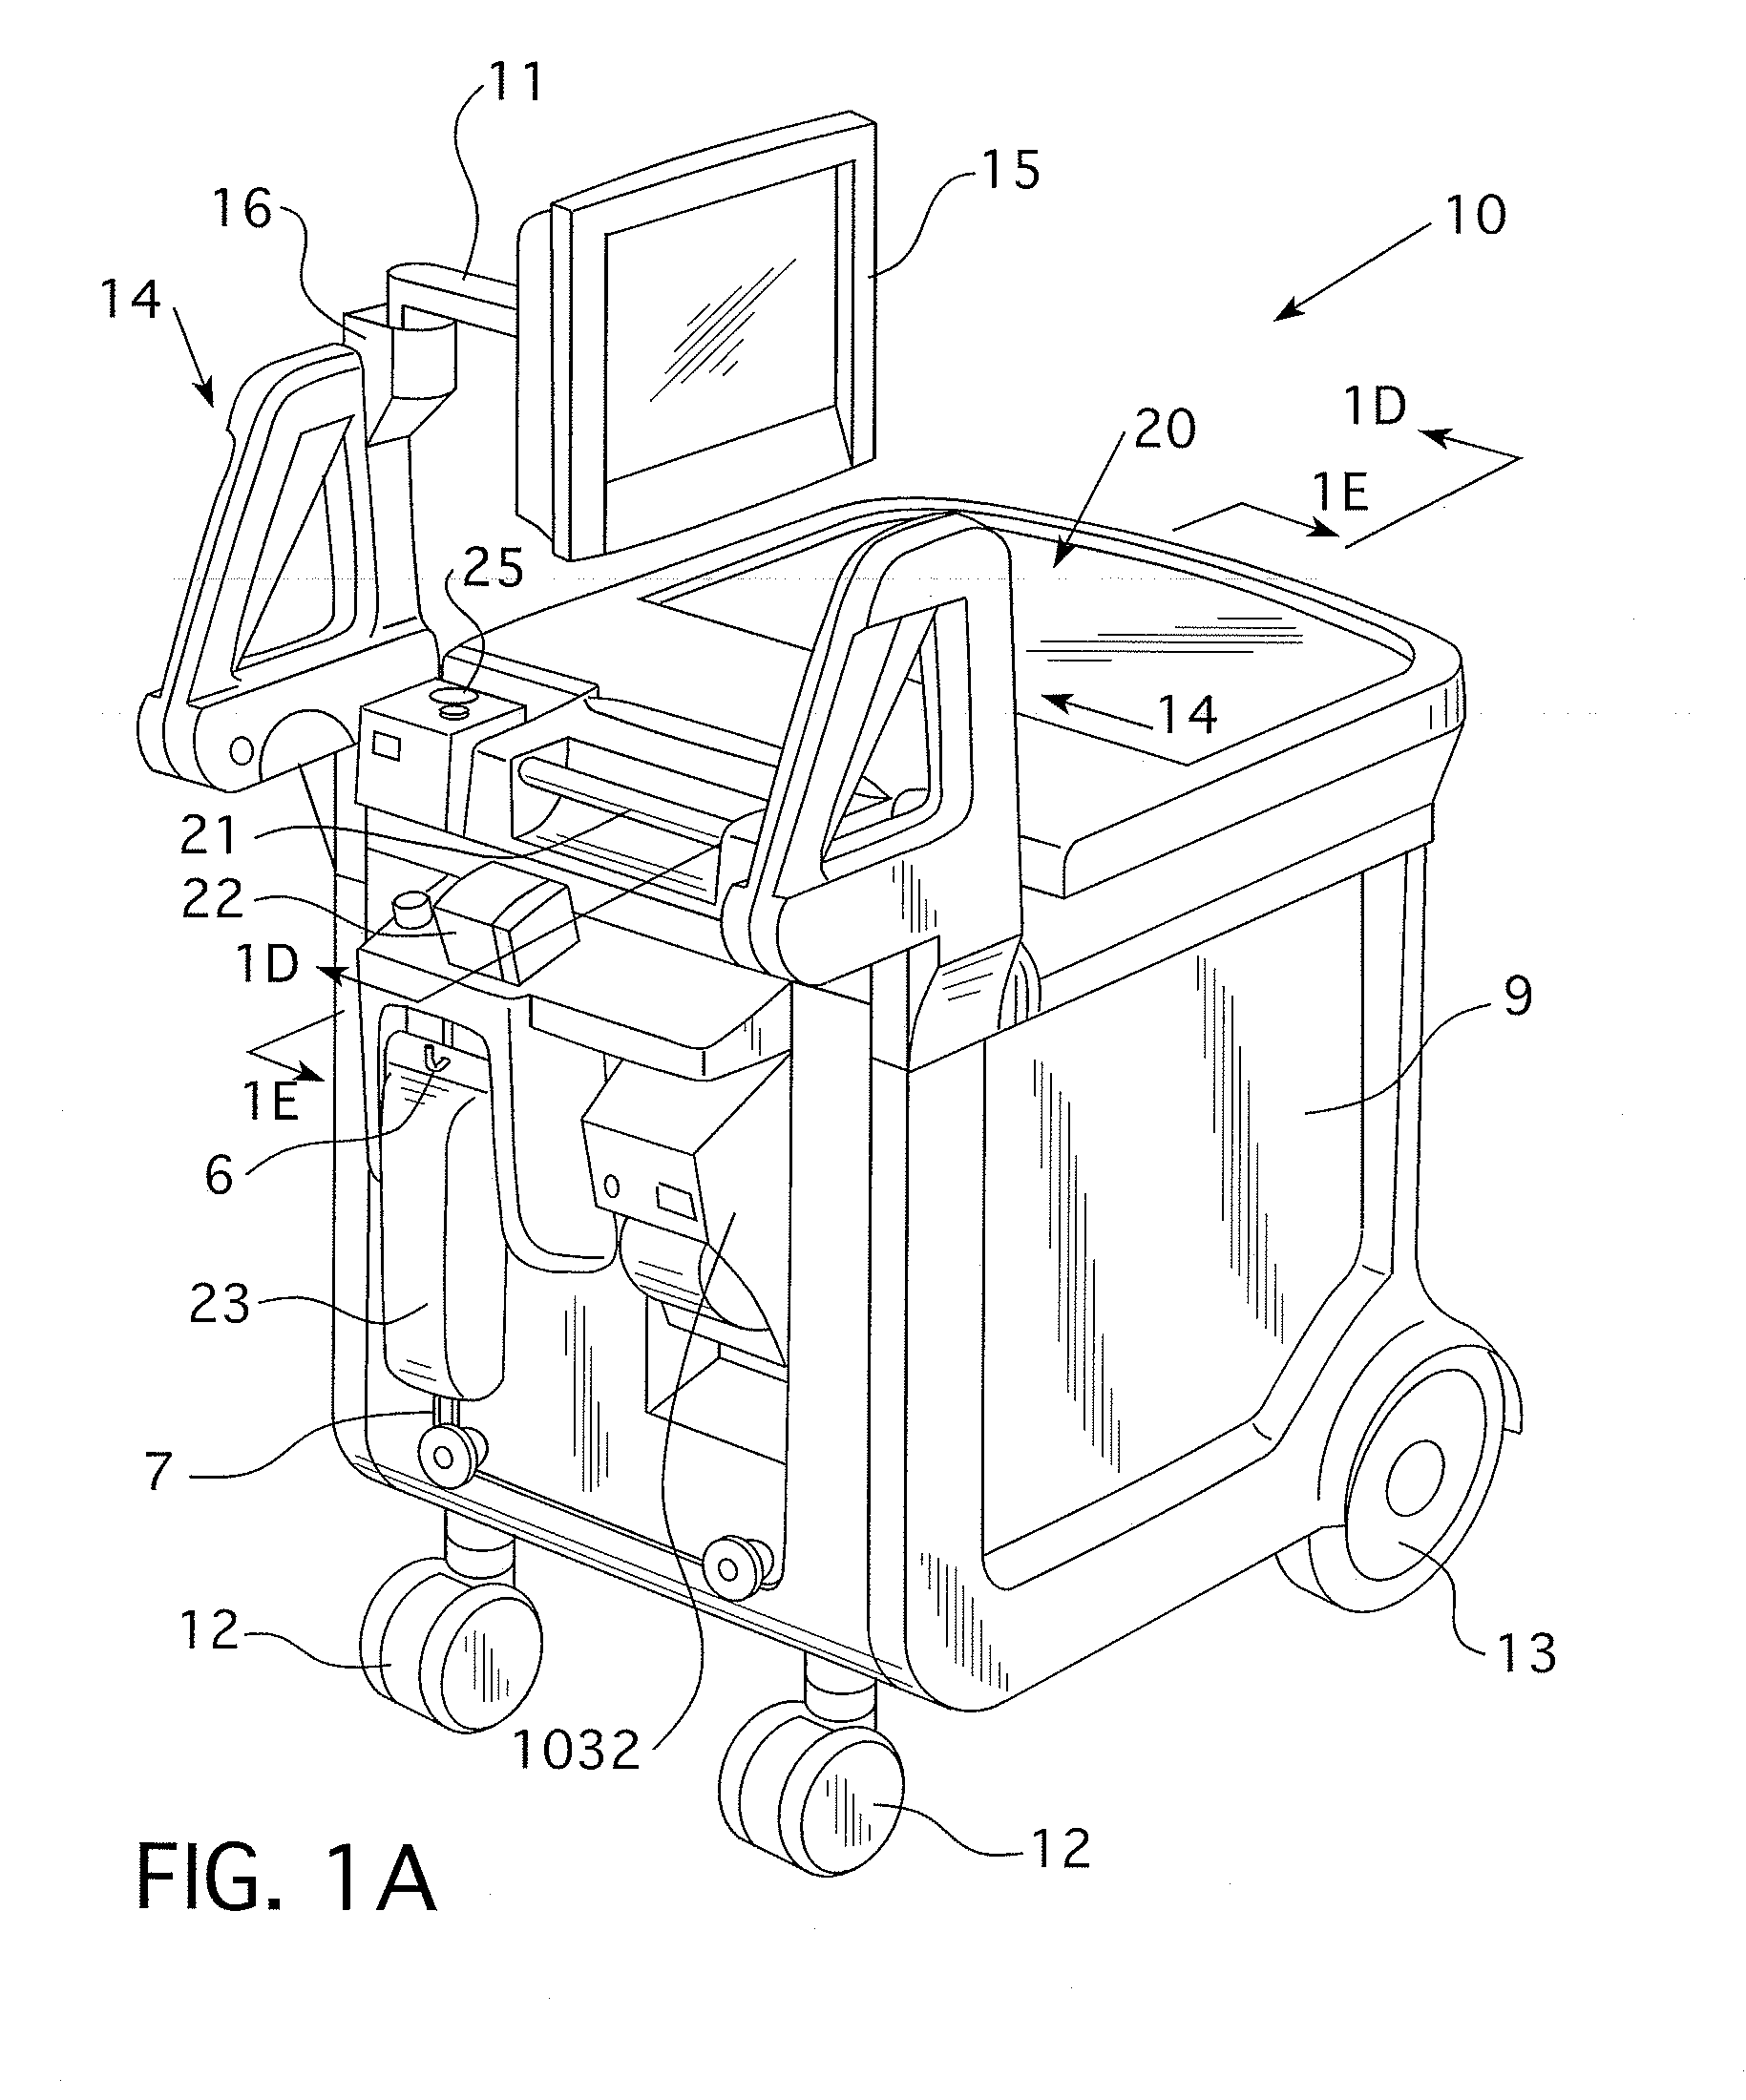 System and Method for Planning and Monitoring Multi-Dose Radiopharmaceutical Usage on Radiopharmaceutical Injectors